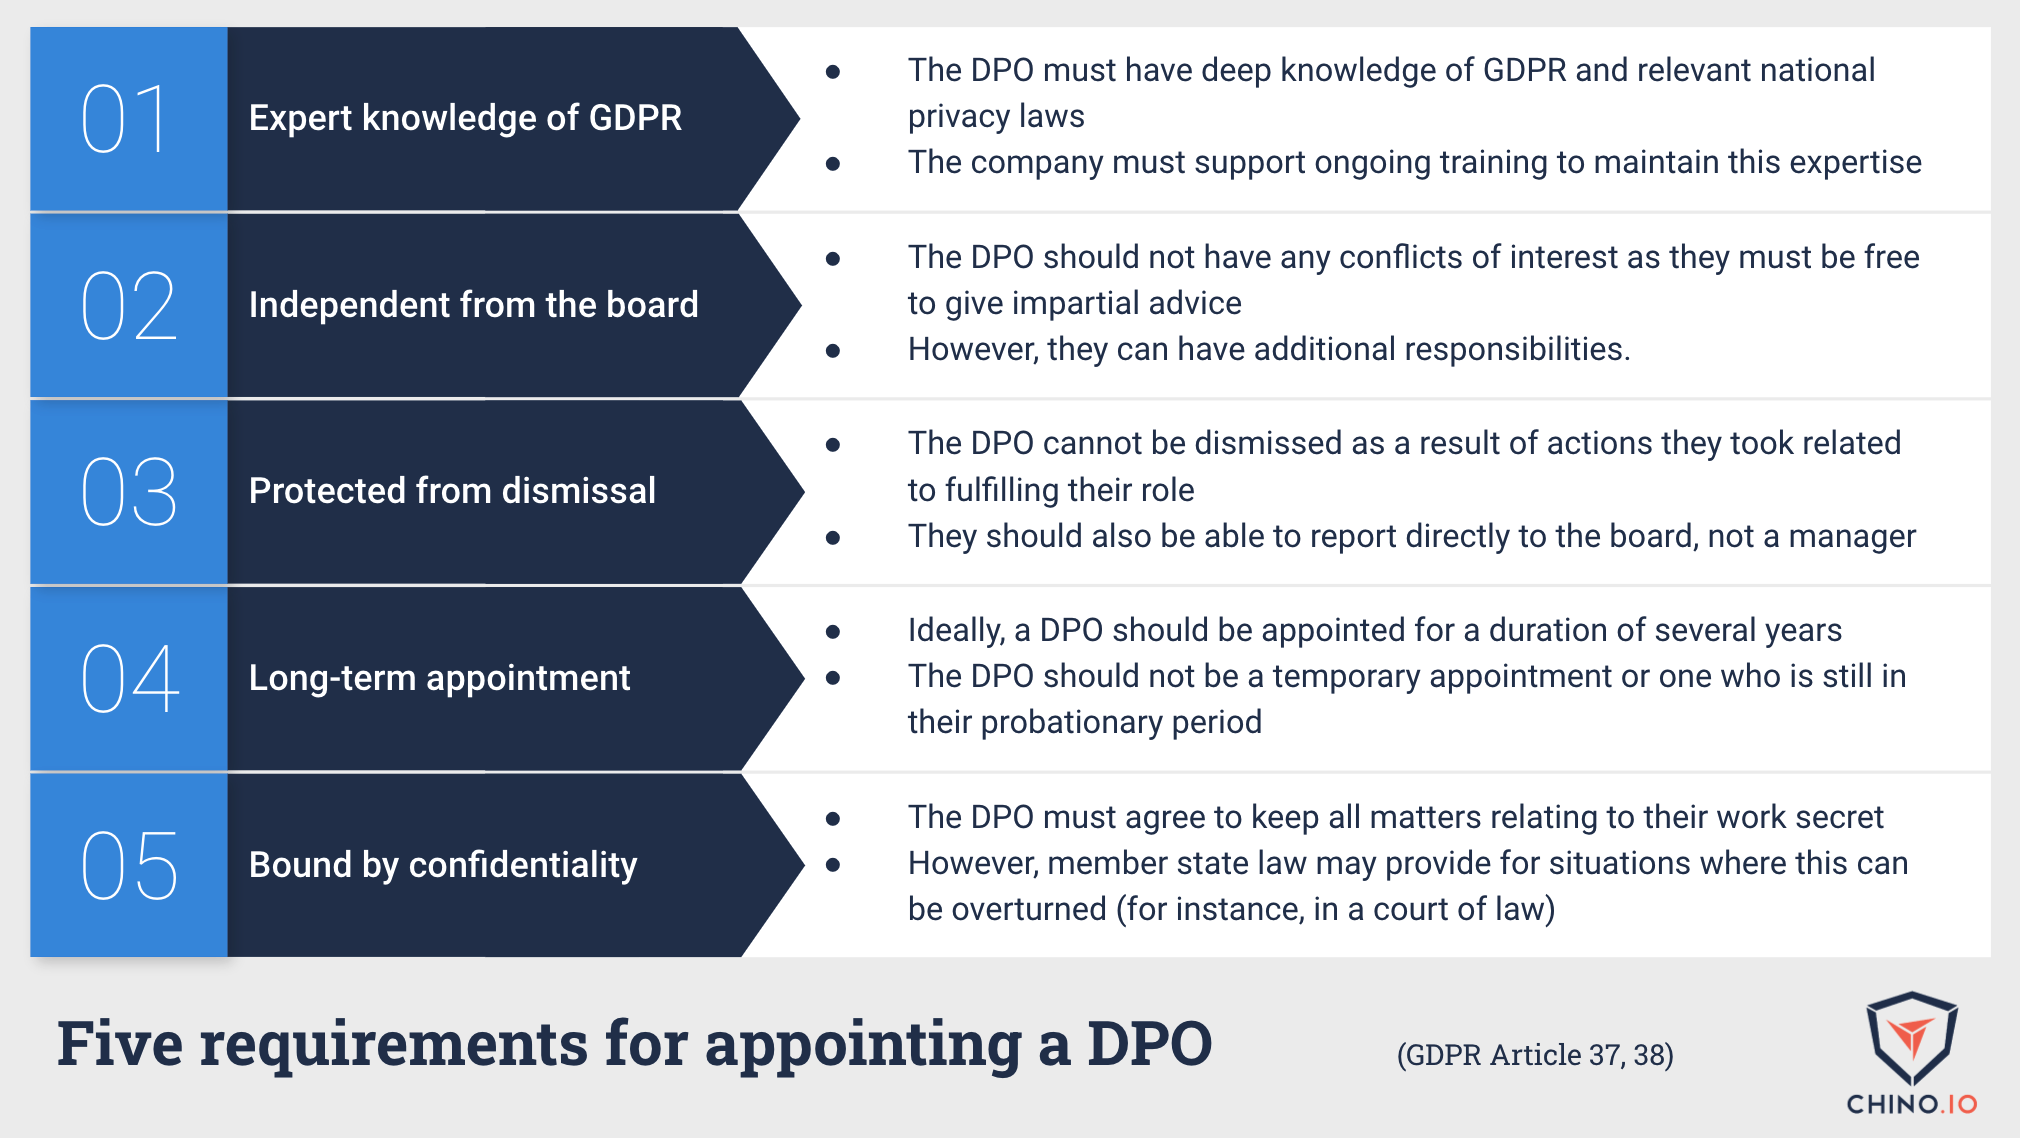 Table with 5 requirements for appointing a DPO according to the GDPR Article 37, 38